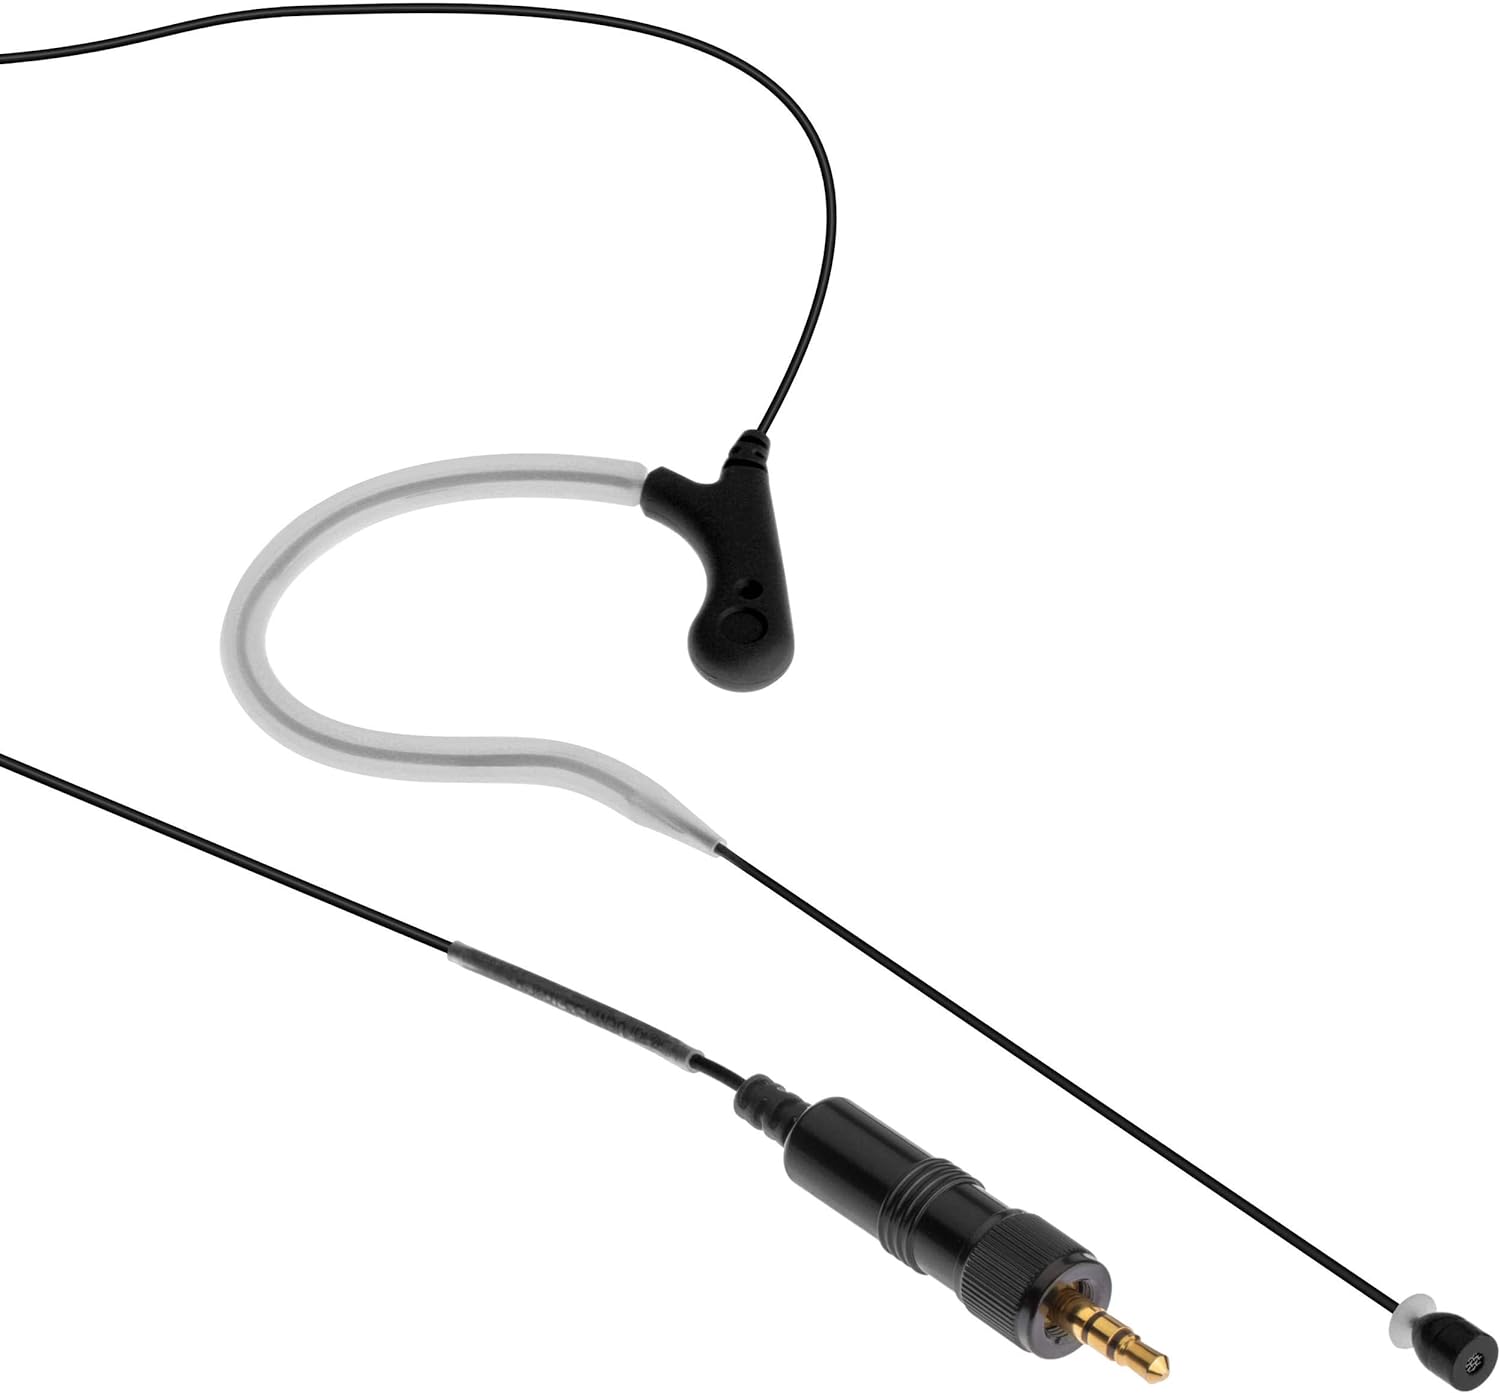 Omni Earset Microphone with 3.5mm Locking Connector